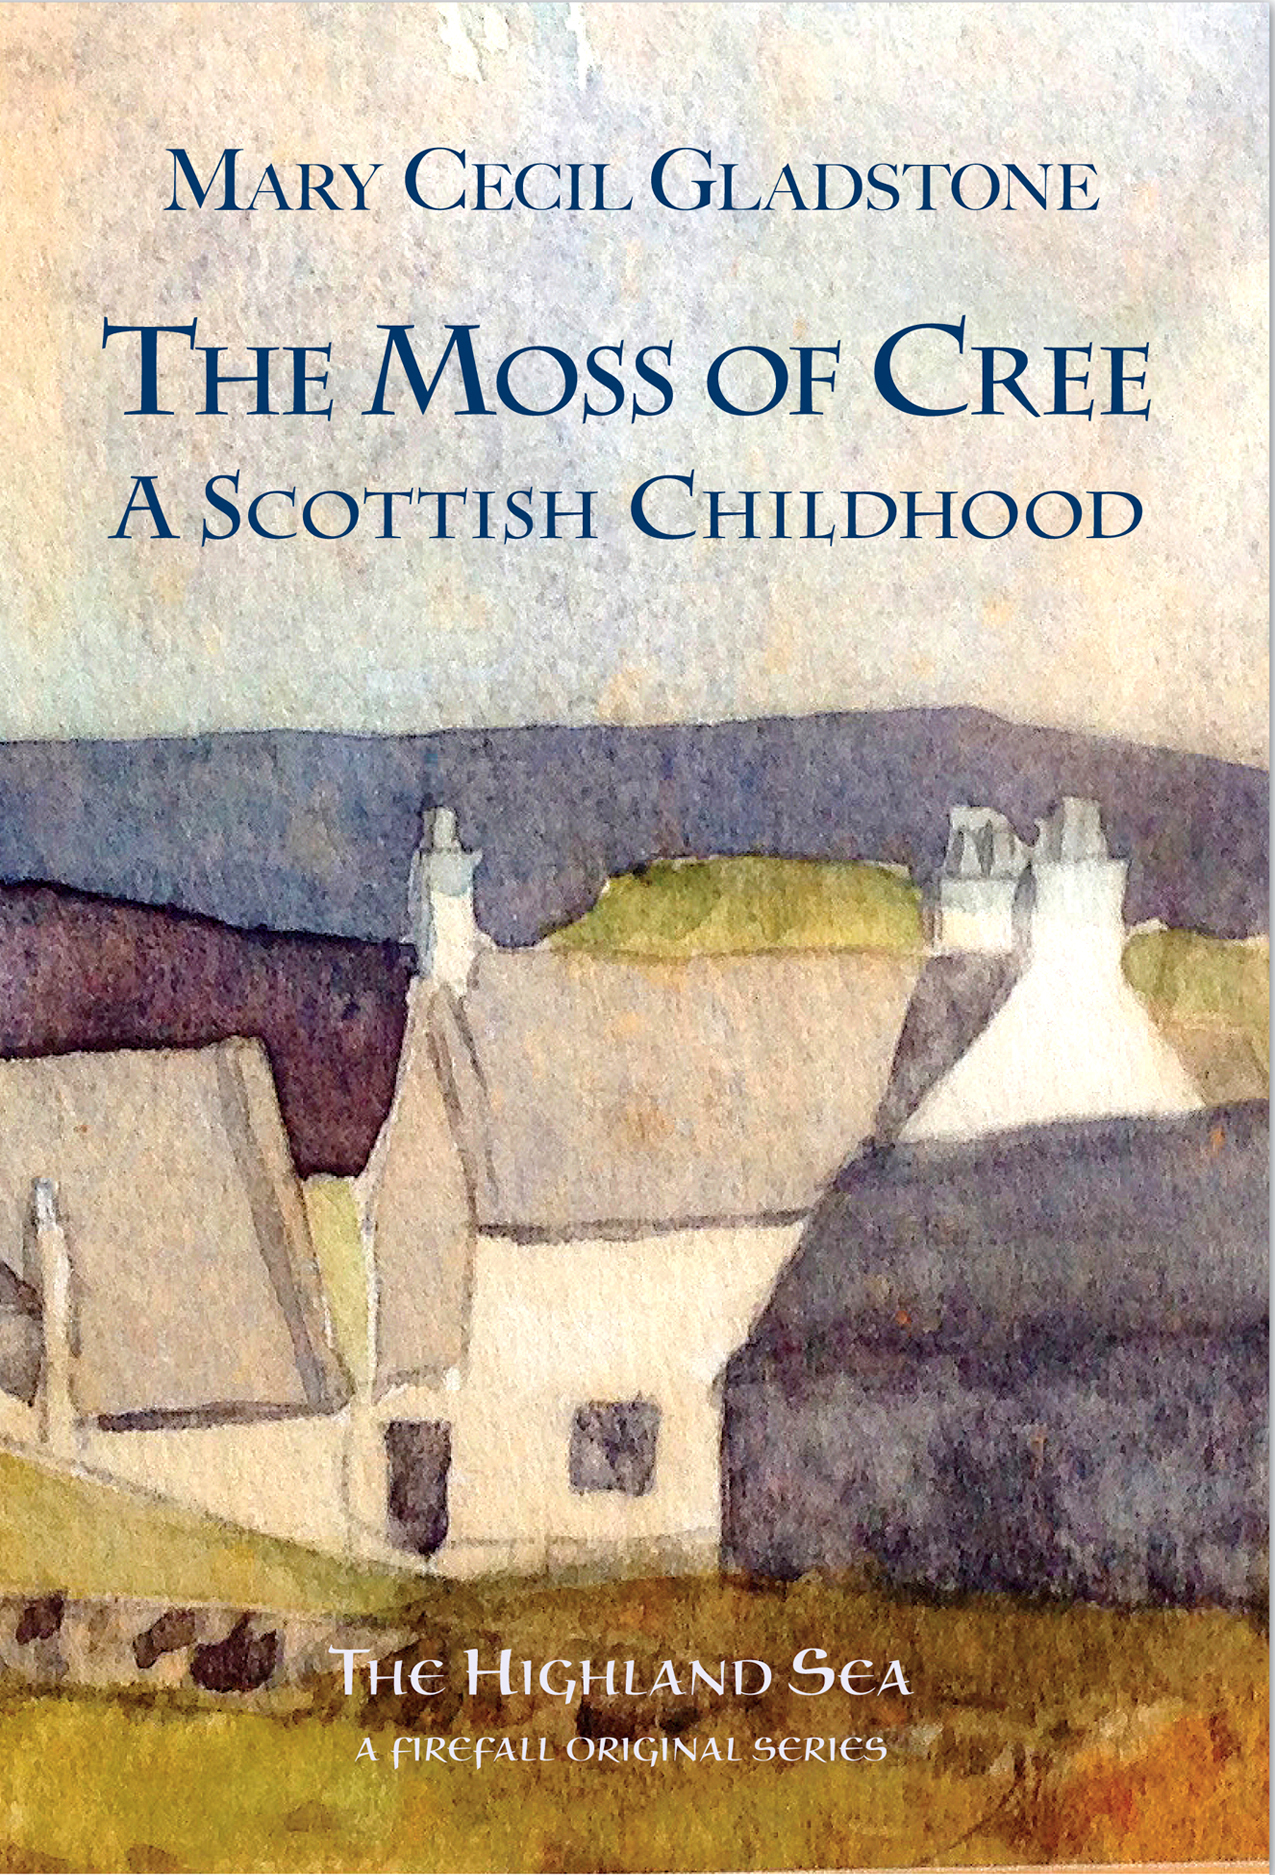 The Moss of Cree, a Scottish Childhood, by Mary C. Gladstone